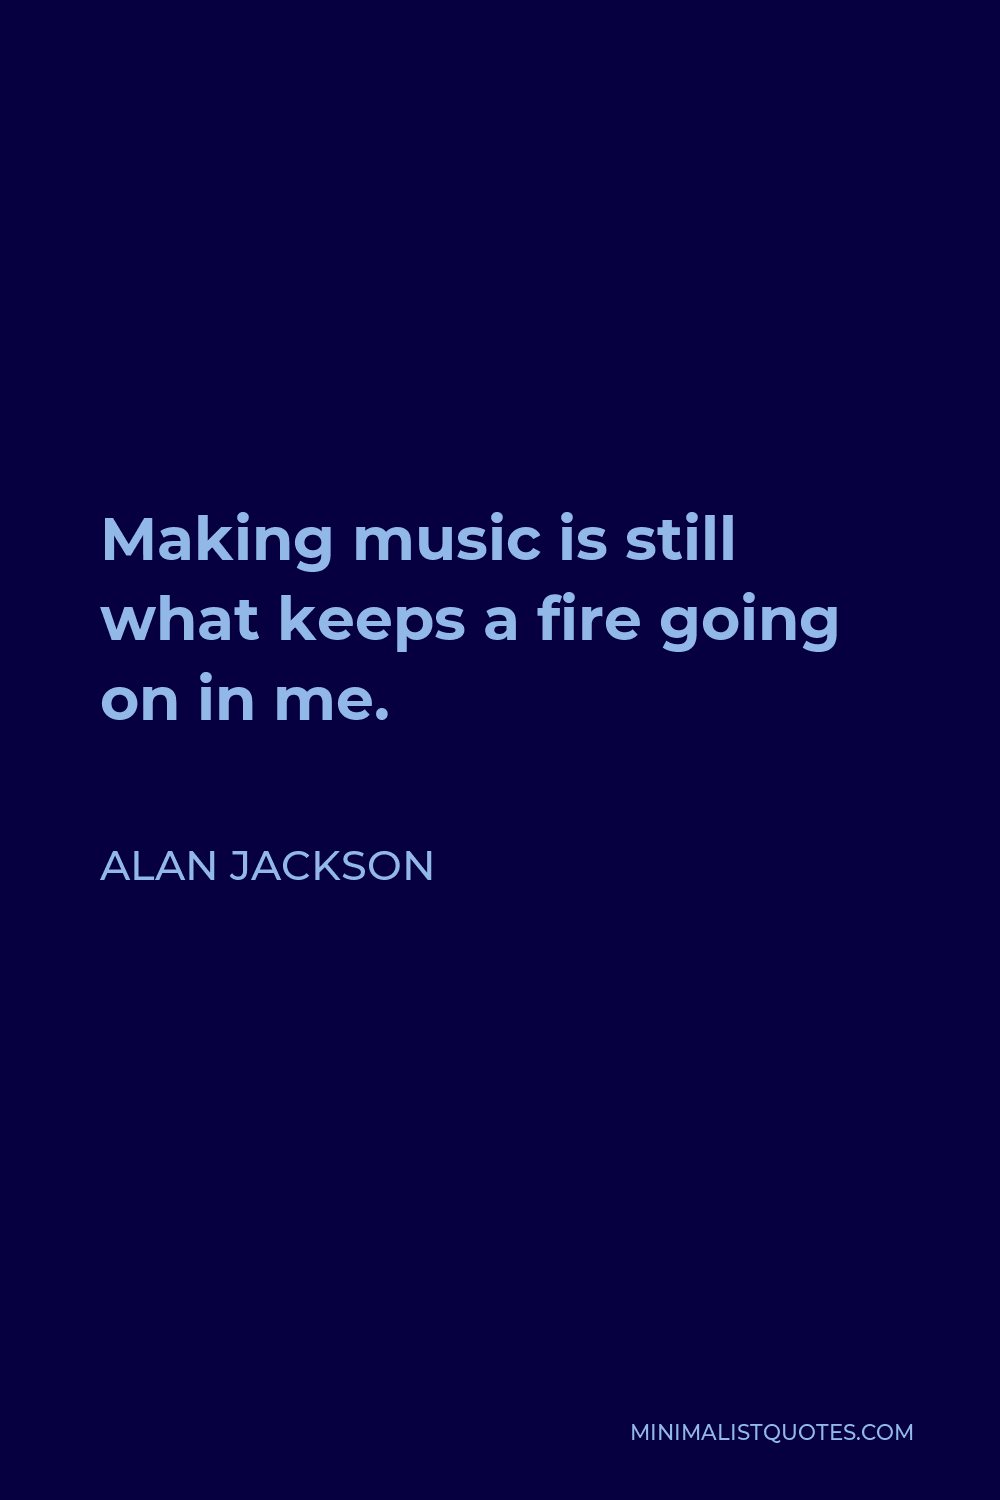 Alan Jackson Quote - Making music is still what keeps a fire going on in me.